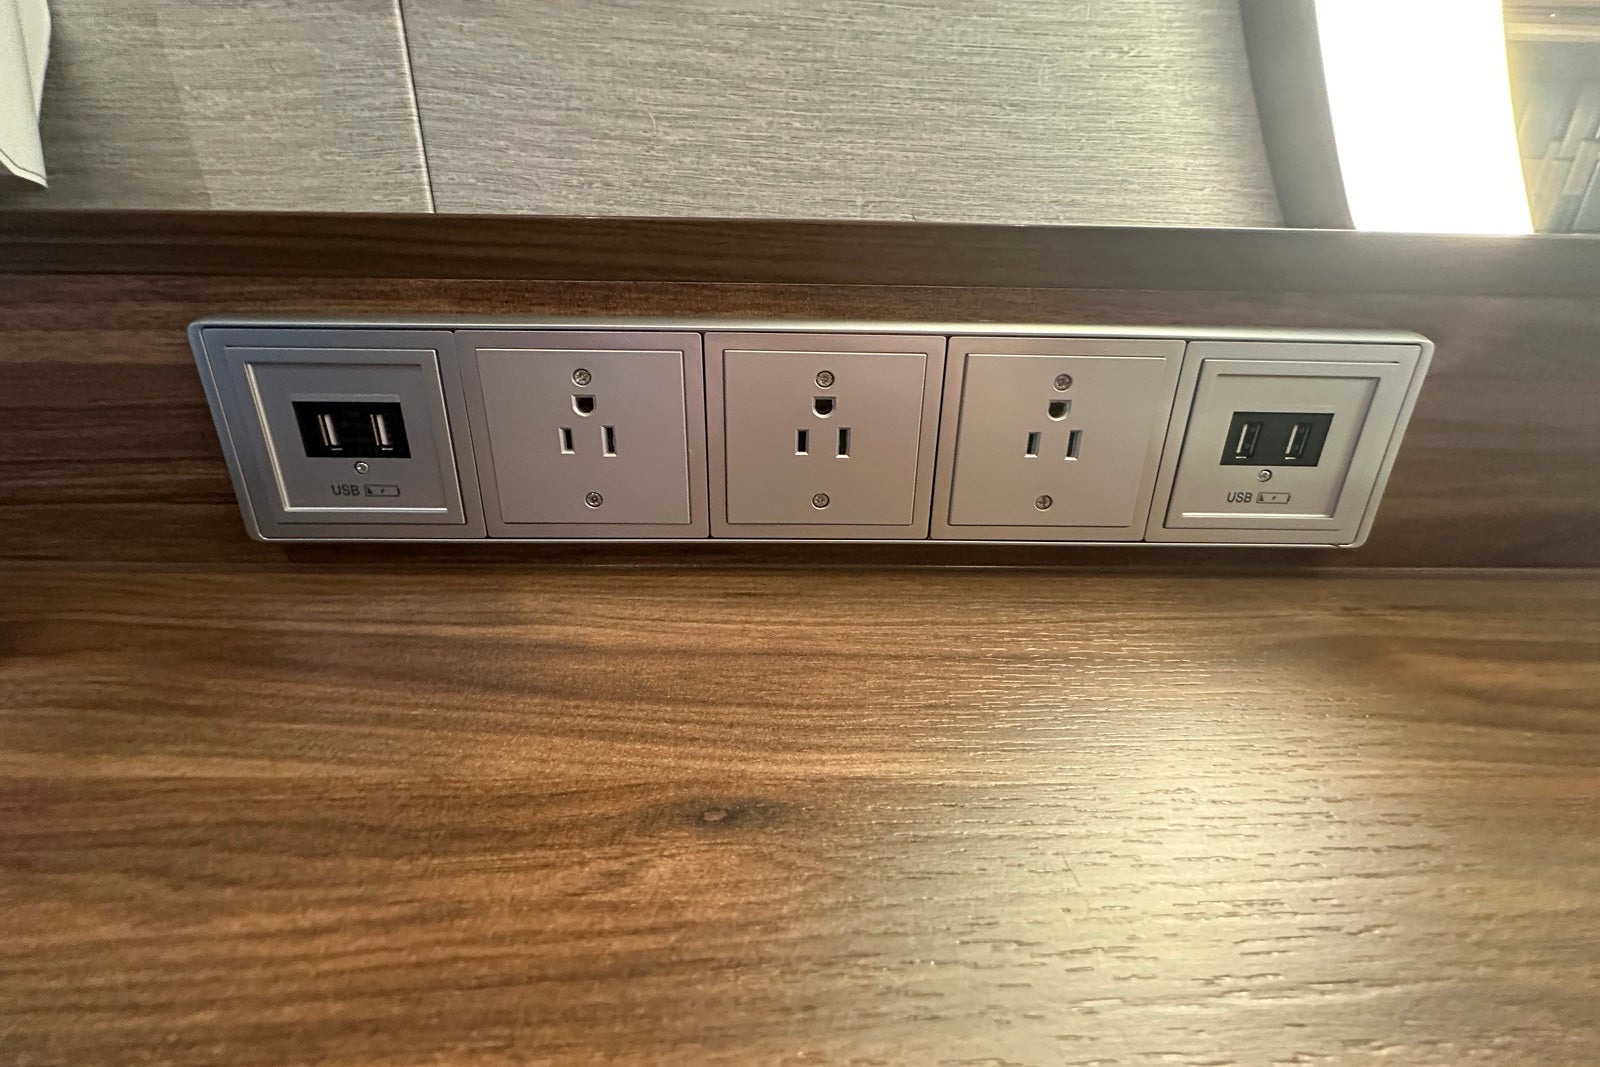 Several North American power outlets and USB outlets